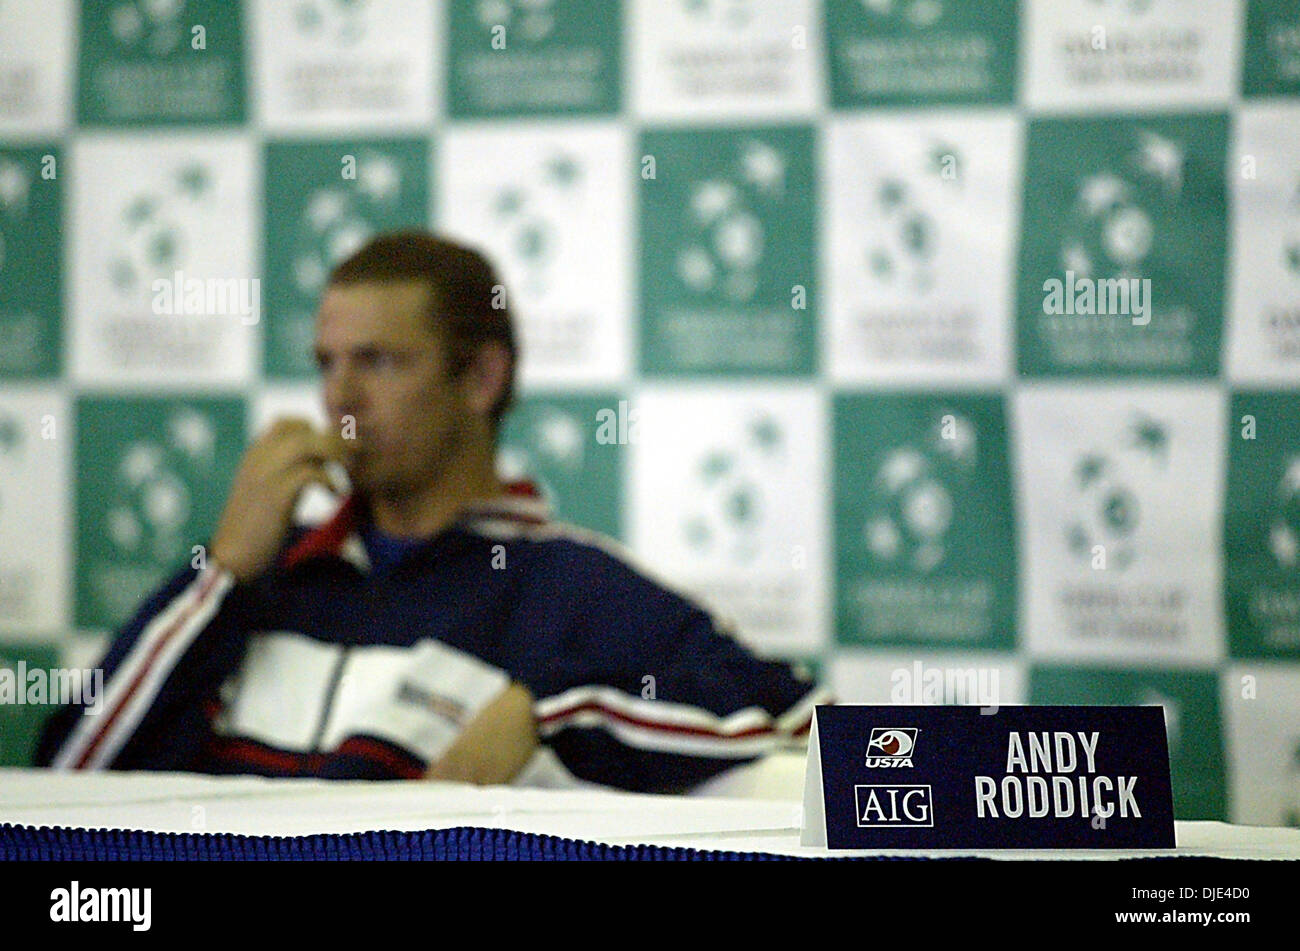 Apr 05, 2004; Delray Beach, FL, USA; Andy Roddick's name plate sits on the table away from the rest of the US Davis Cup team during a press conference at the Delray Beach Stadium and Tennis Center Monday, April 5, 2004, as headway picks up towards the big match against Sweden this weekend. Roddick was given the day off by team captain Patrick McEnroe after Roddick's win in the Nasd Stock Photo